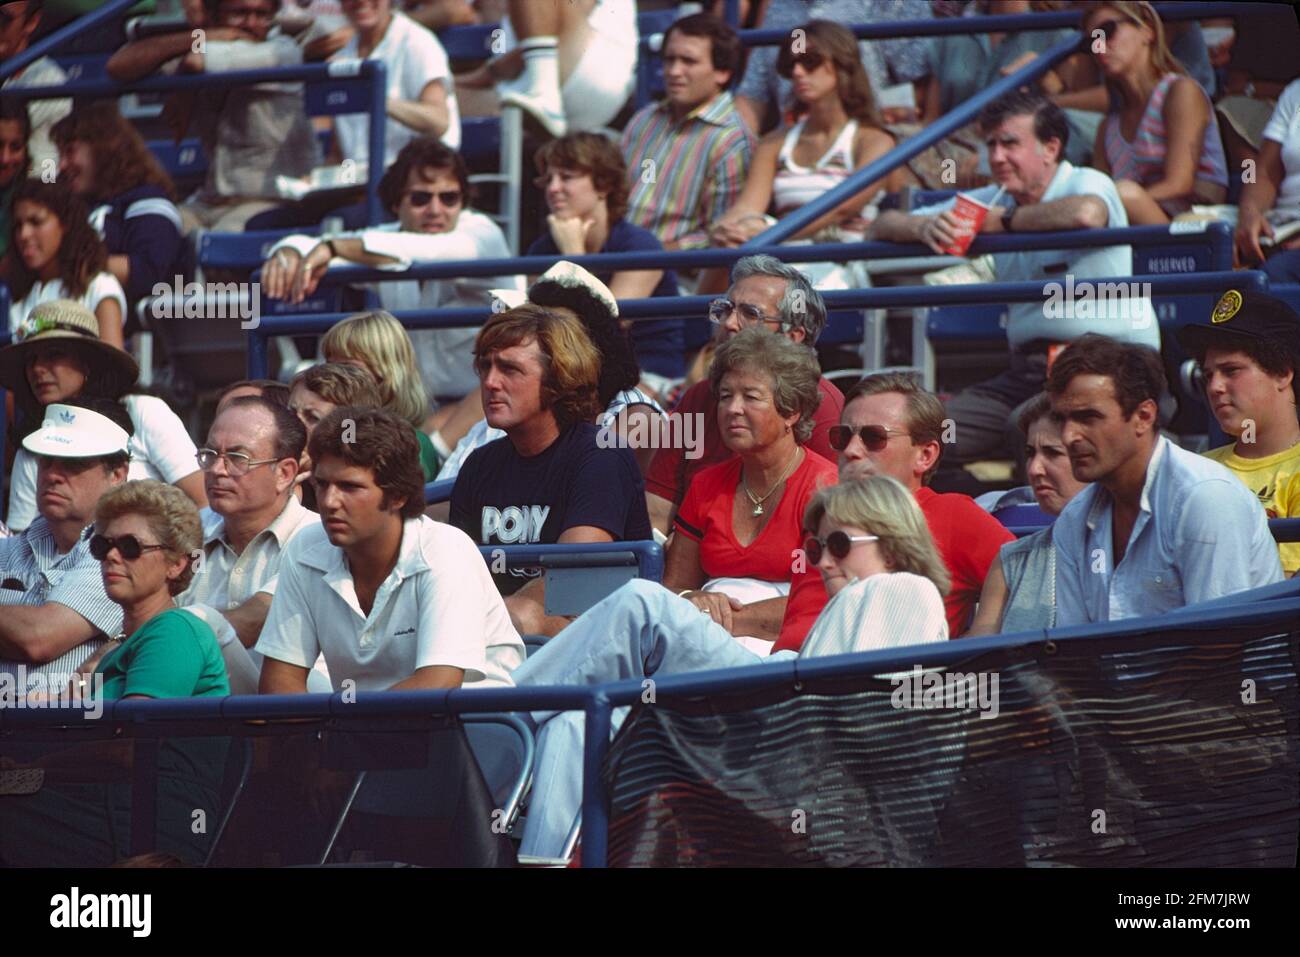 Tracy Austin (USA) coach Robert Lansdorp (Pony shirt) , mother (red dress) and brother John (white shirt) at the 1980 US Open Tennis Championships Stock Photo